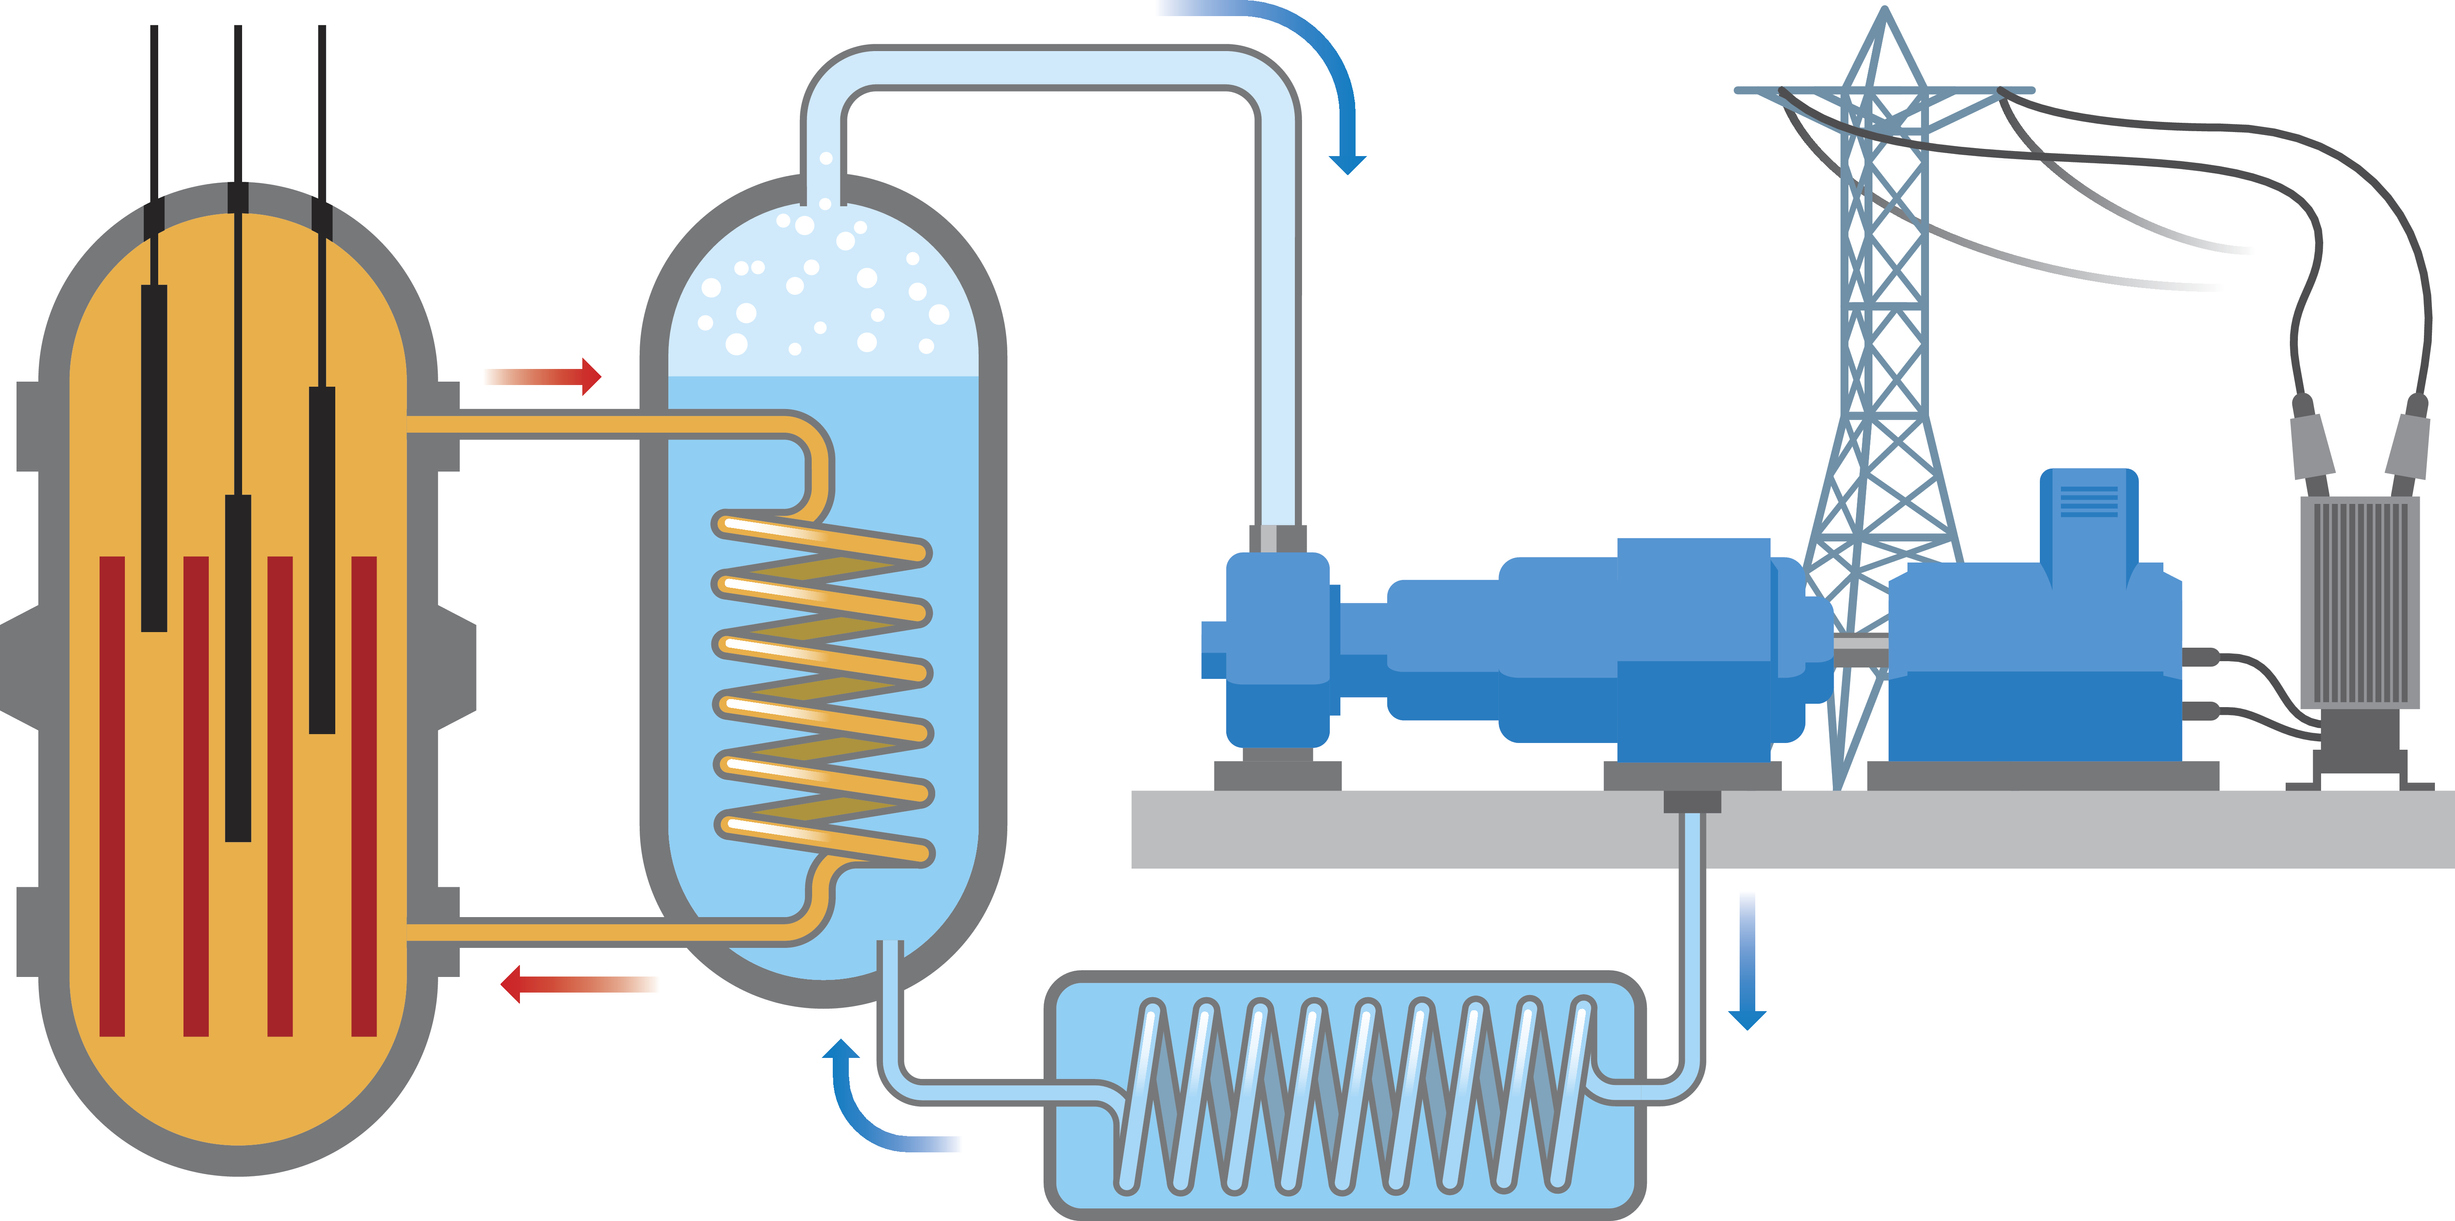 Illustration of a nuclear reactor reusing water